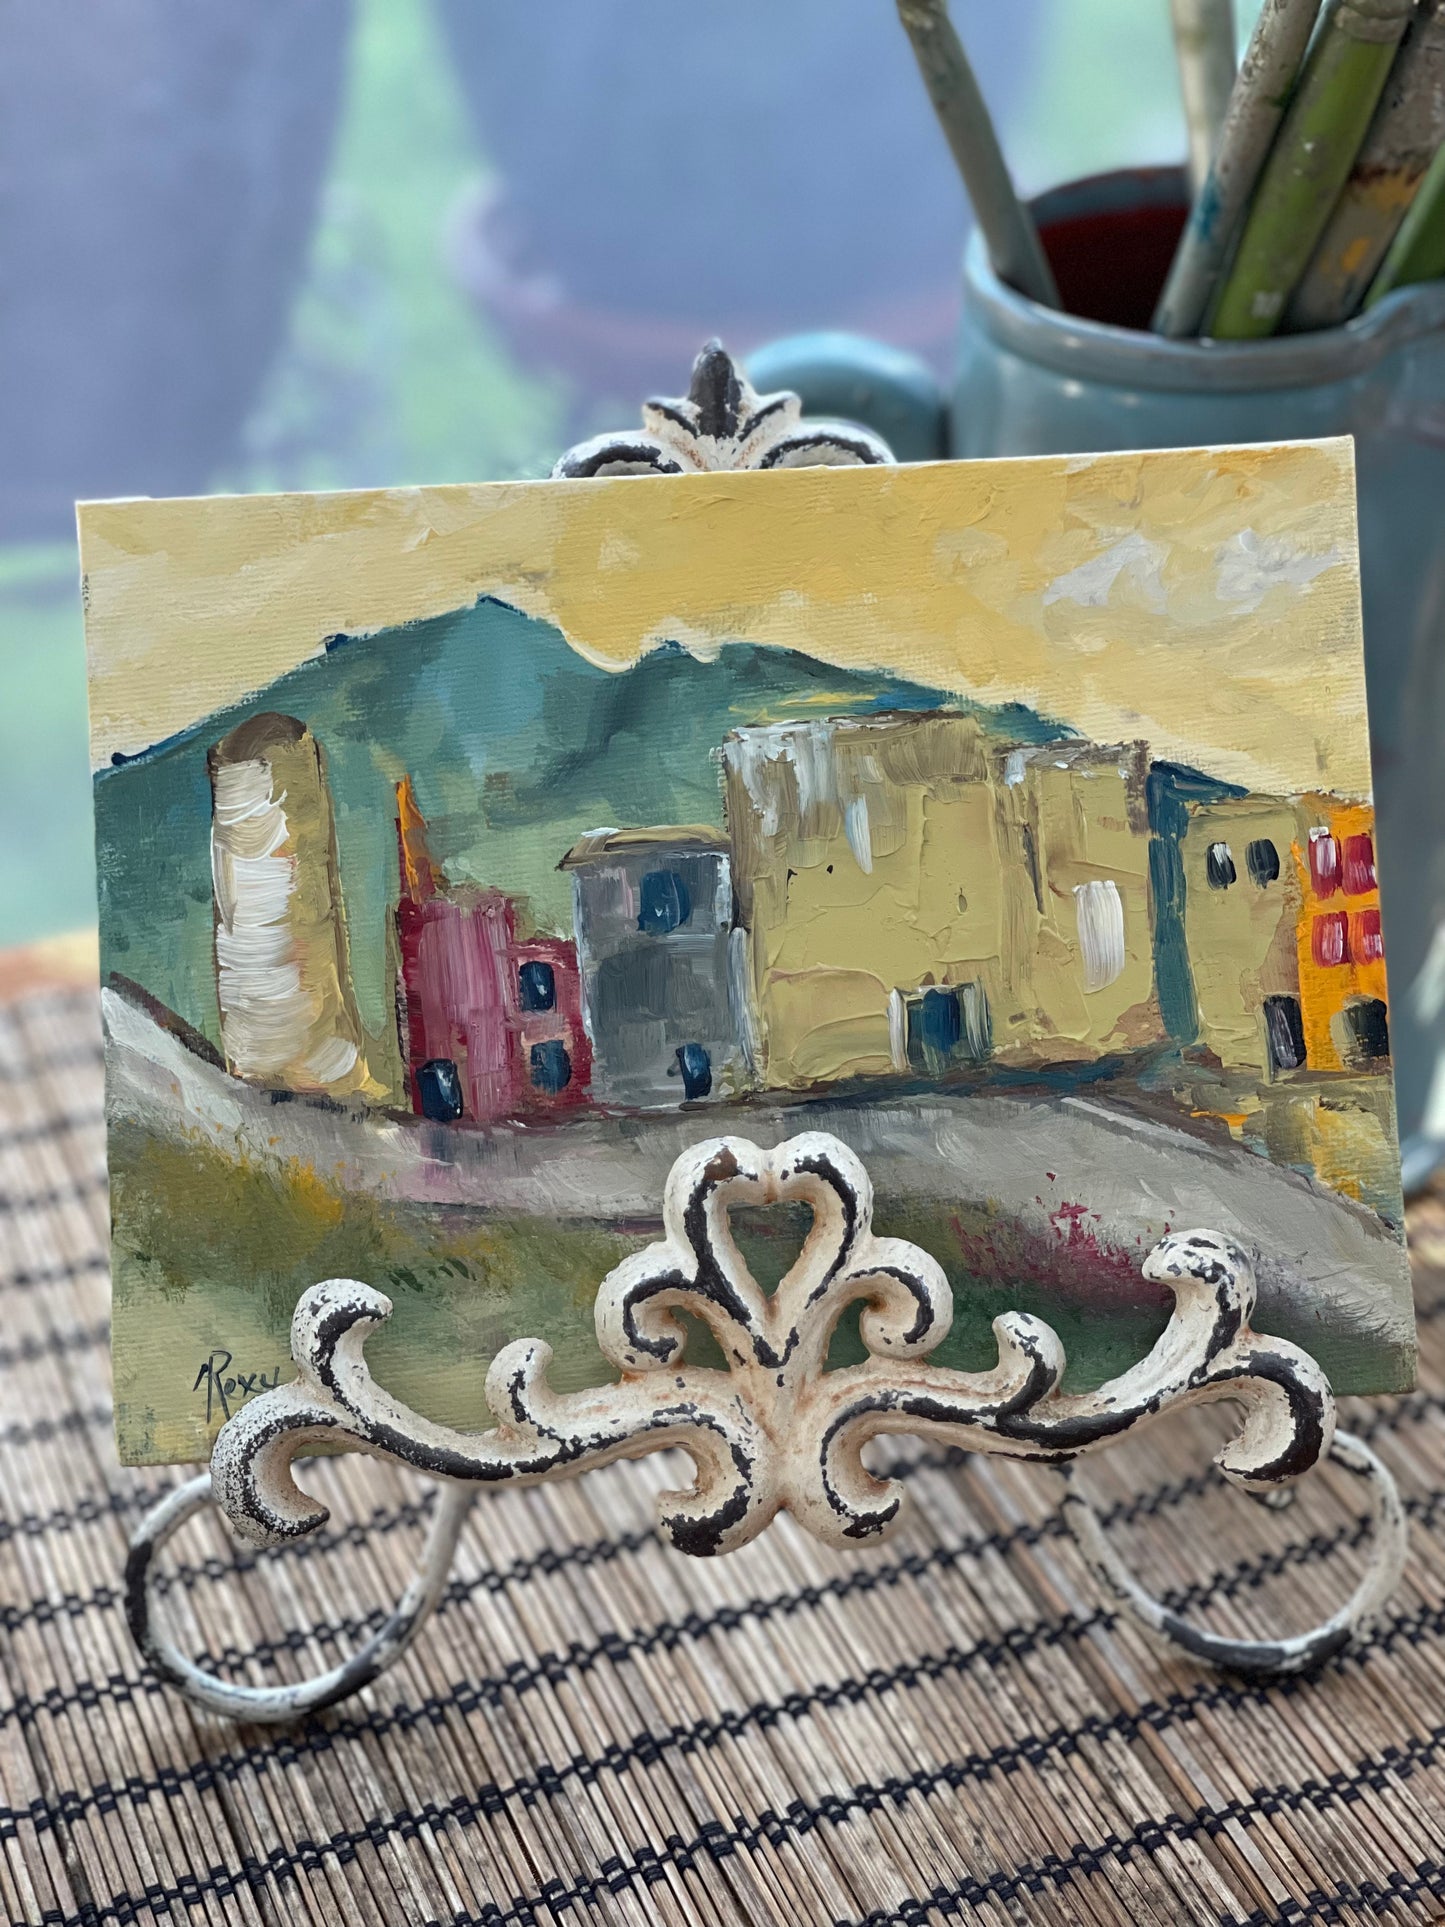 Just Passing By (Ghost Town) Original Oil Painting 6x8 Unframed